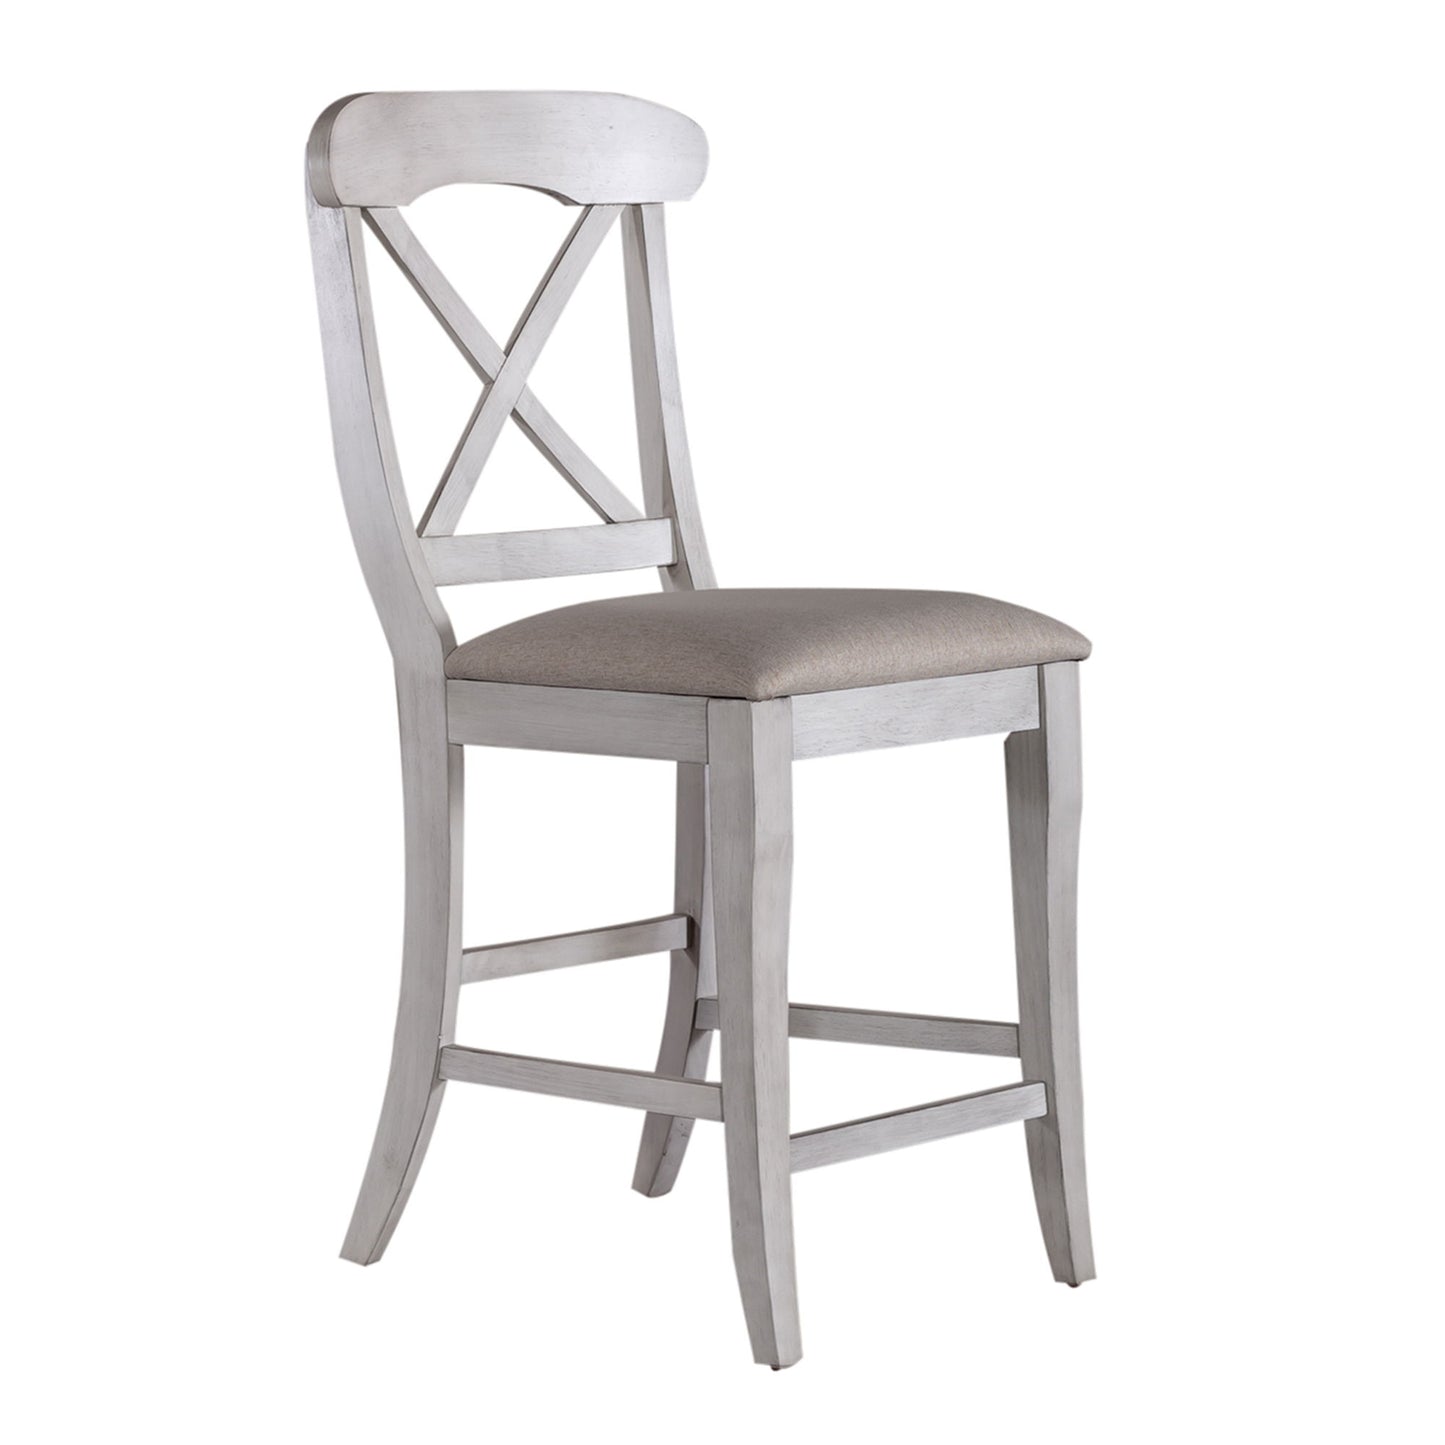 Ocean Isle - Upholstered X Back Counter Chair (Rta)